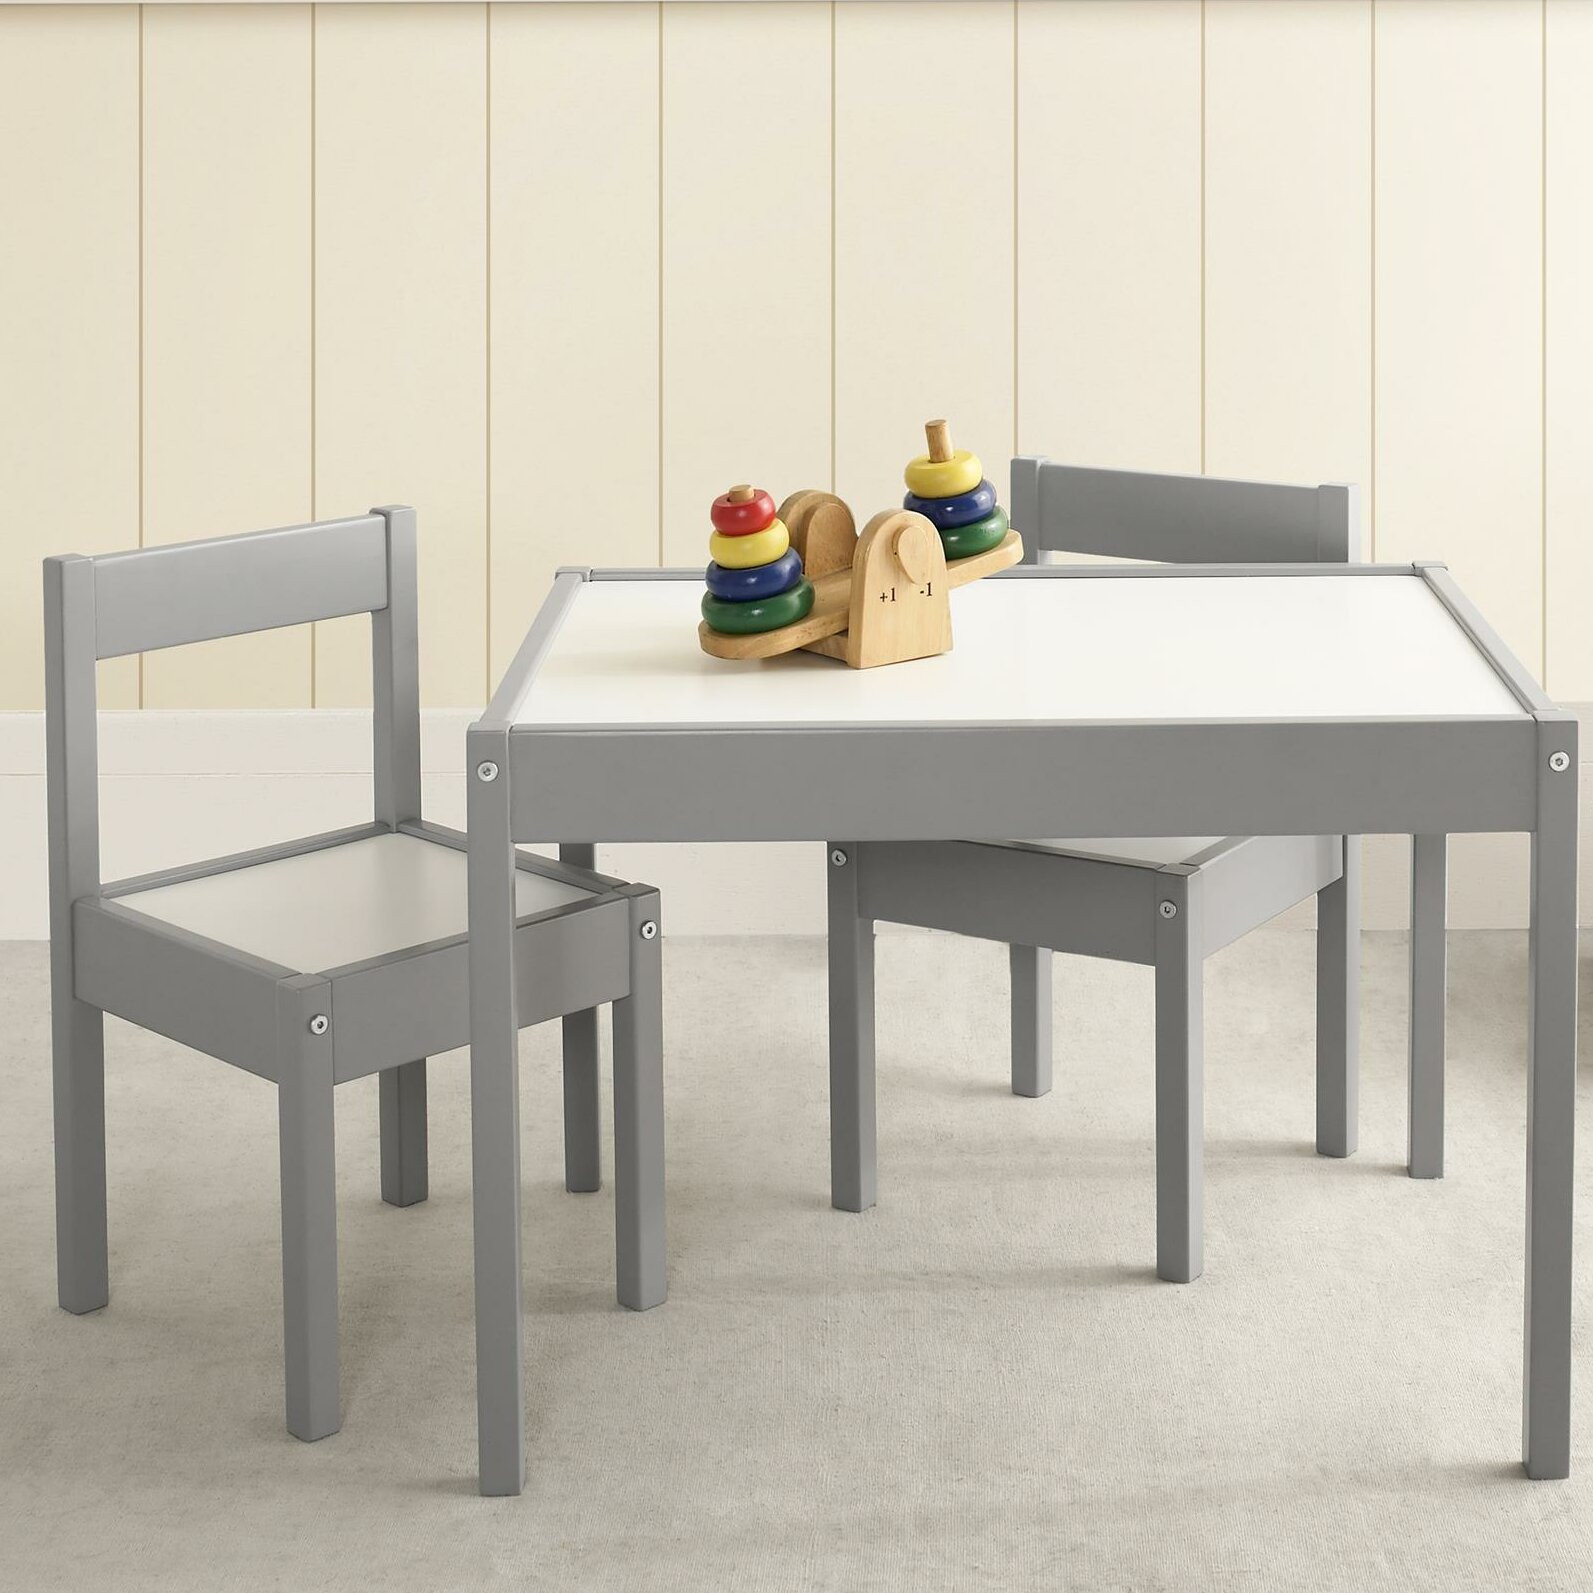 Kids Table And Chairs
 Viv Rae Miriam 3 Piece Rectangular Table and Chair Set